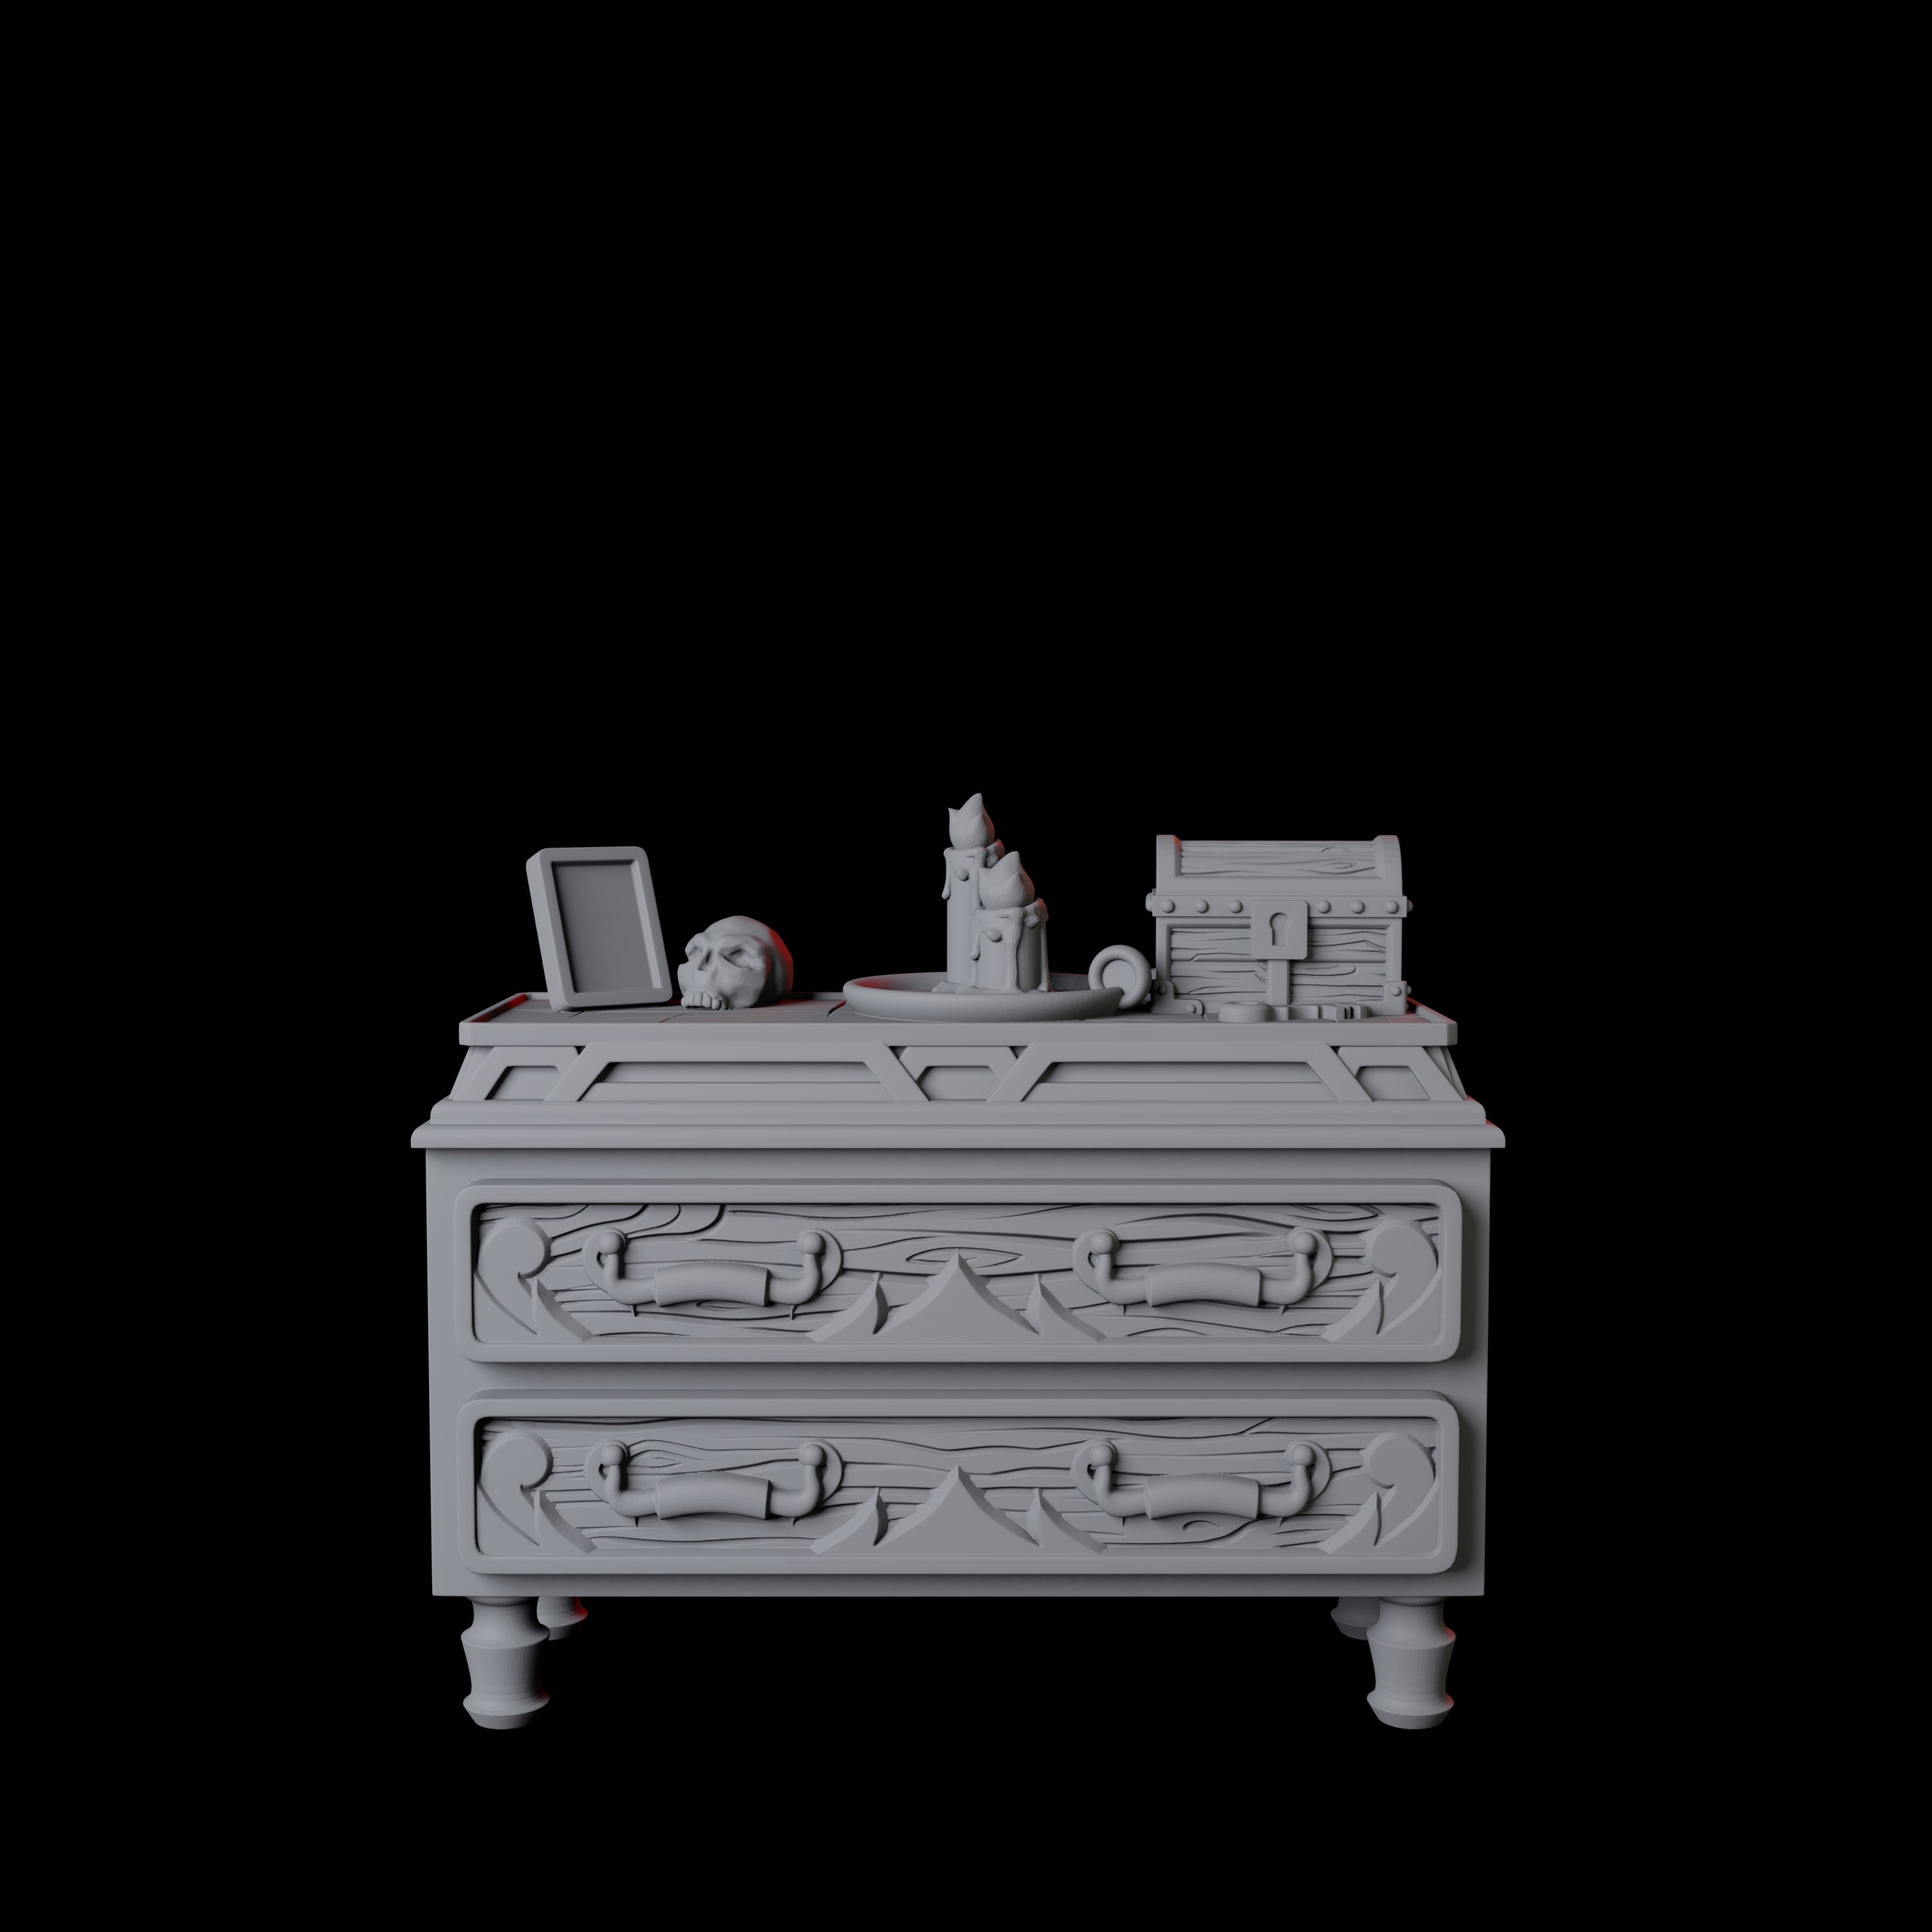 Castle Bedroom Furniture Miniature for Dungeons and Dragons, Pathfinder or other TTRPGs